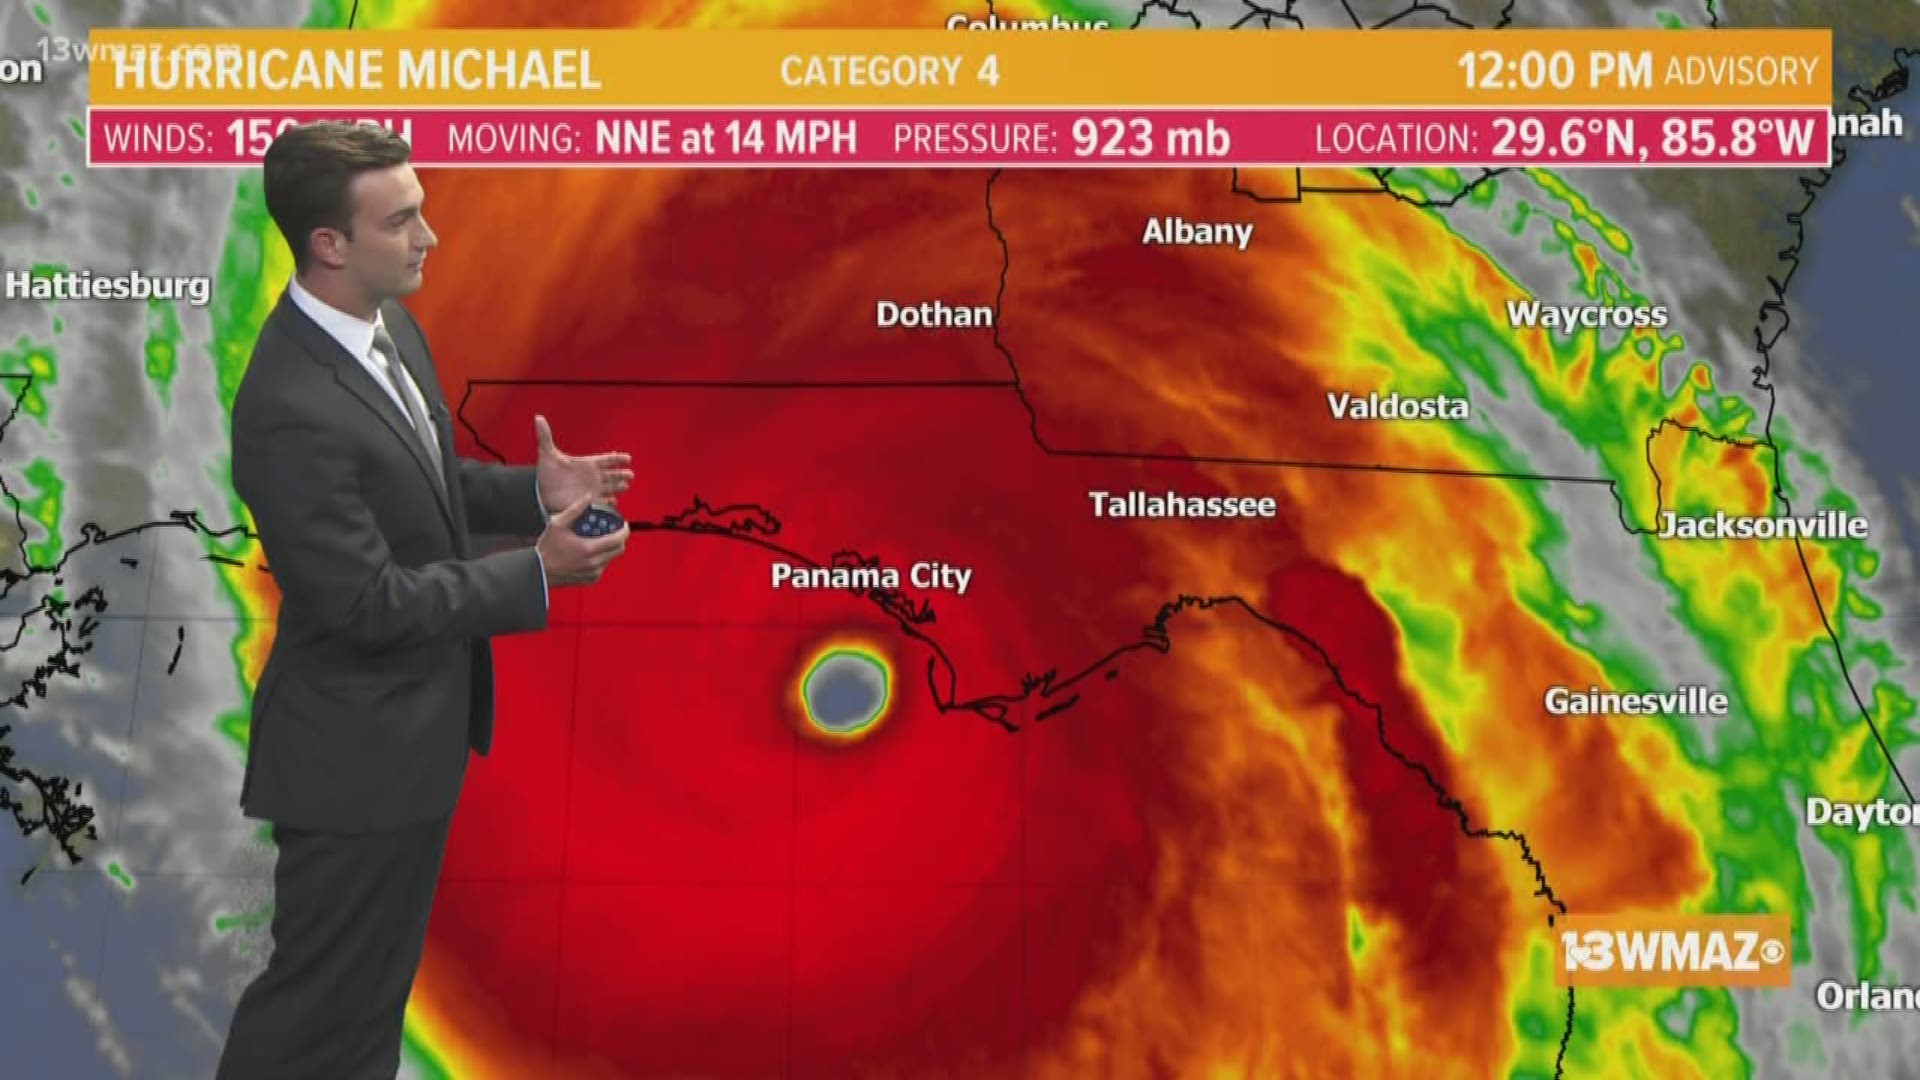 Join 13WMAZ Meteorologist Hunter Williams with the latest on Hurricane Michael in Georgia hours before landfall is expected